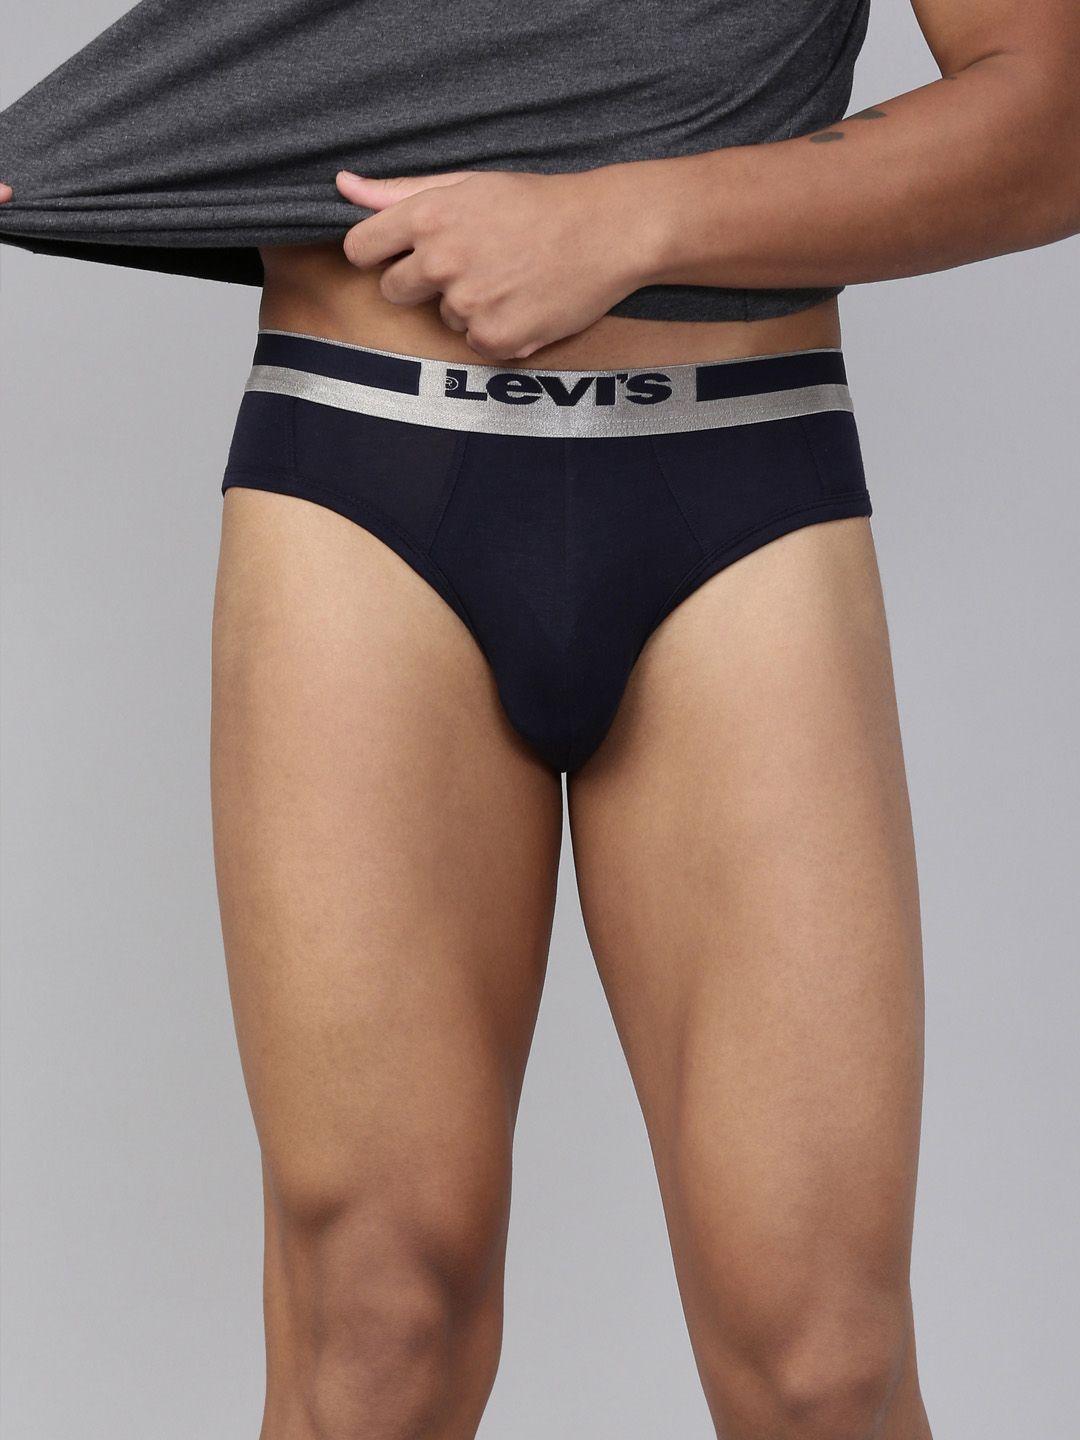 Levis Men Smartskin Technology Supima Cotton Briefs with Tag Free Comfort-029